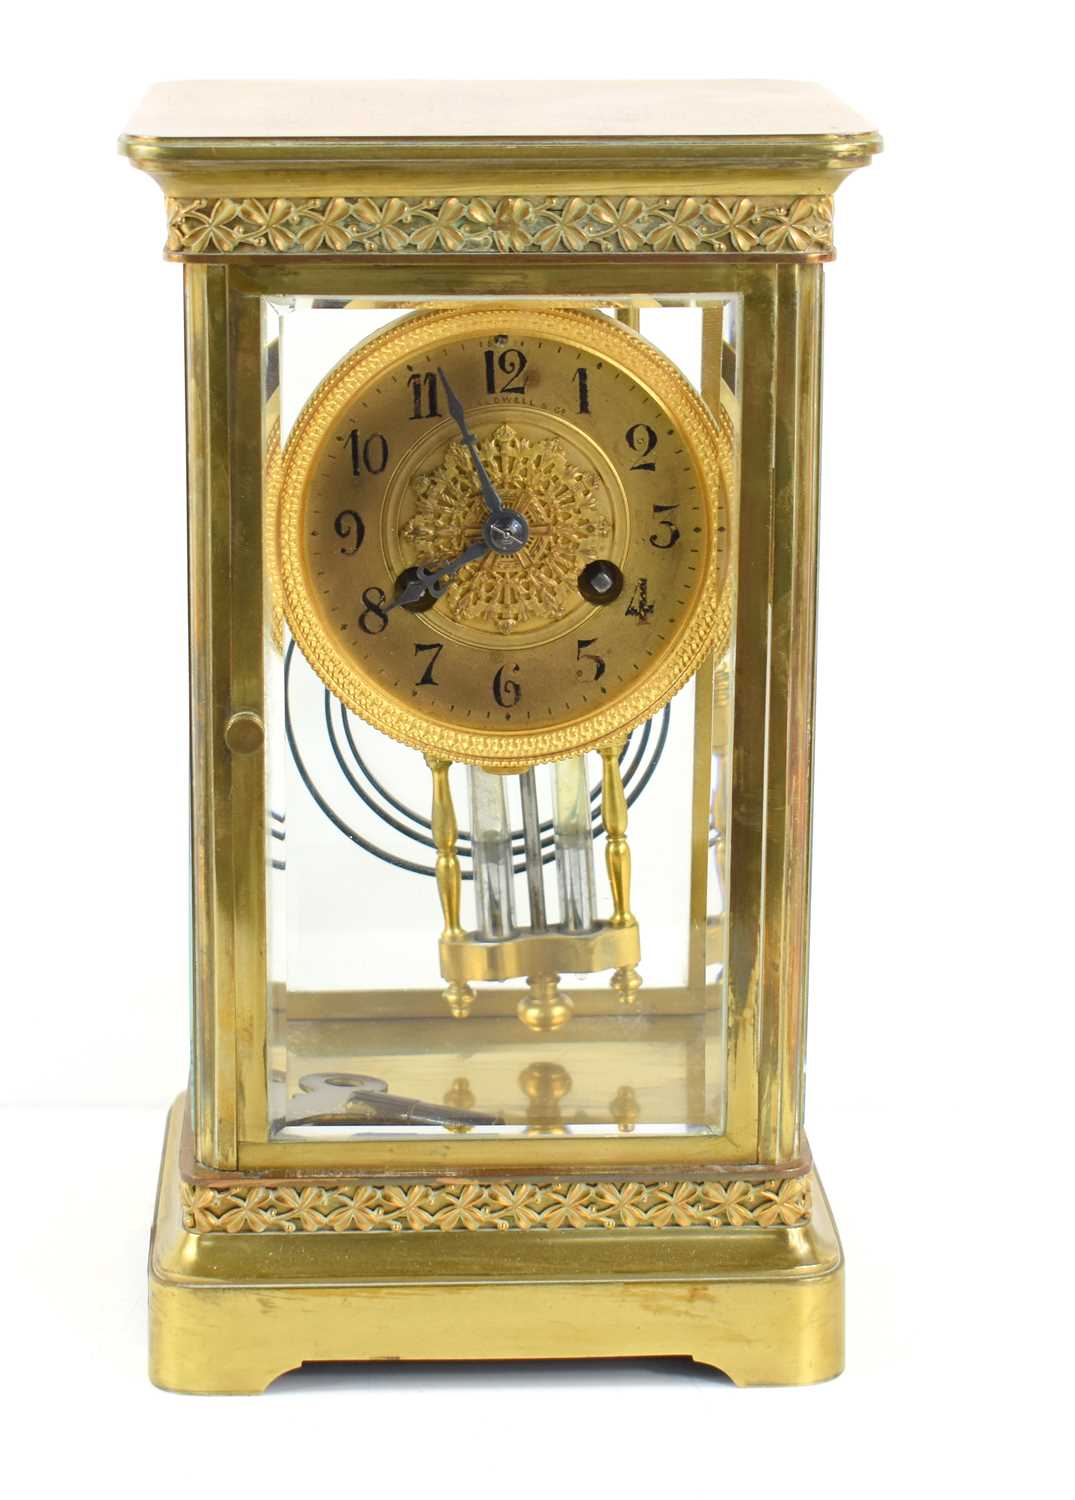 An antique J.E Caldwell & Co mantle clock, the clock suspended in a gilded brass and glass case,